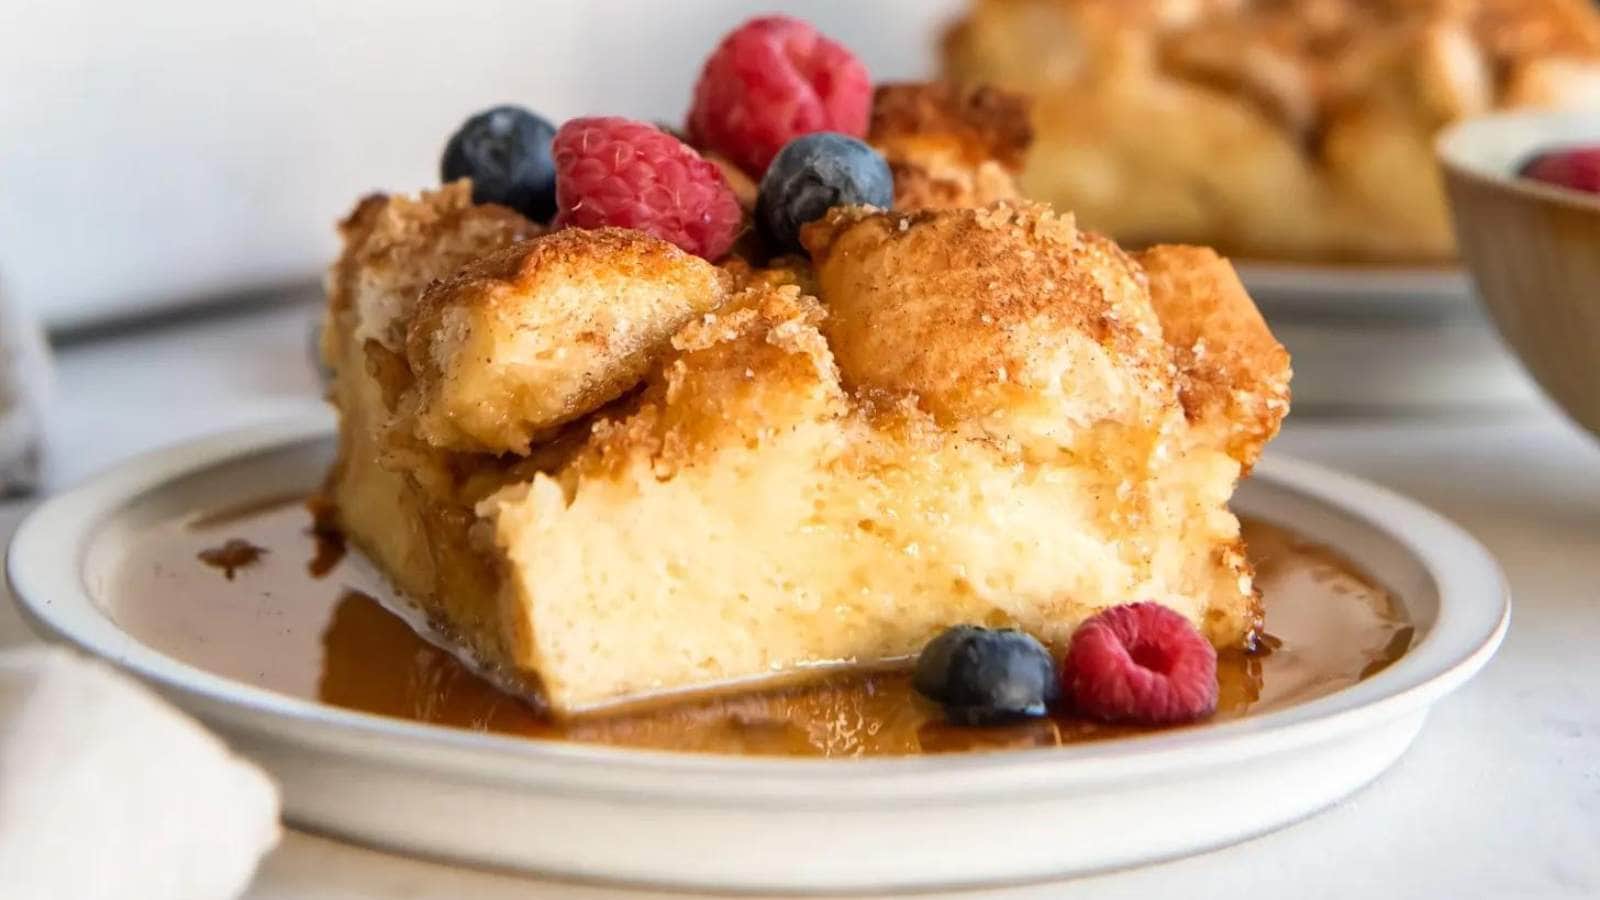 <p>Start your day with this fuss-free overnight French toast casserole! It is pillowy, soft on the bottom, and slightly crunchy on top. Serve this comforting make-ahead family favorite for breakfast or brunch.</p><p><strong>Get the Recipe: <a href="https://www.ifyougiveablondeakitchen.com/french-toast-casserole/" rel="noreferrer noopener">Overnight French Toast Casserole</a></strong></p>